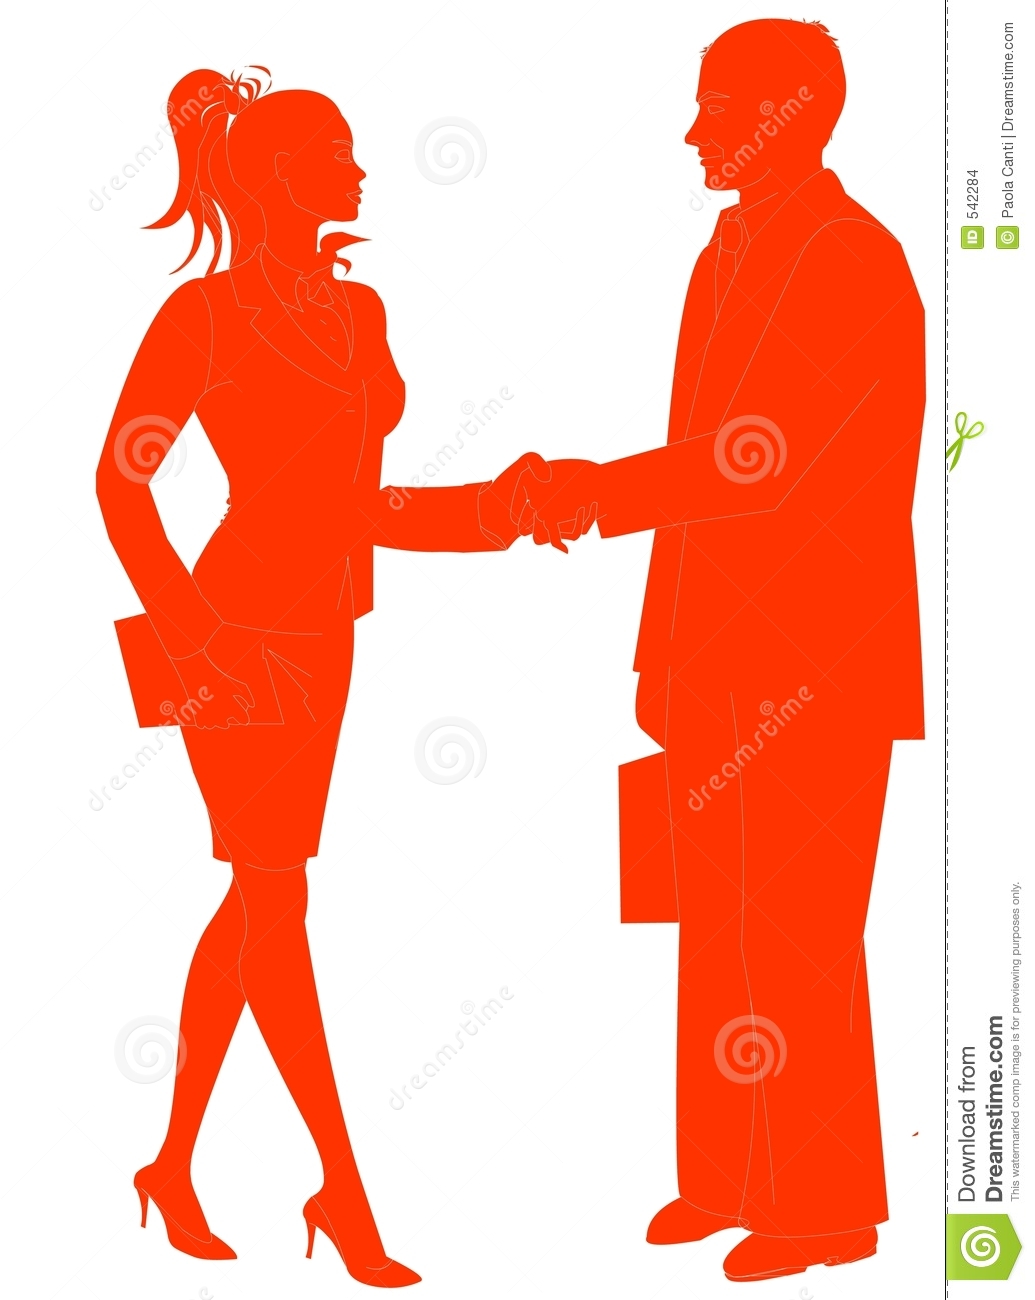 Business People Silhouette Shaking Hands Business People Shaking Hands